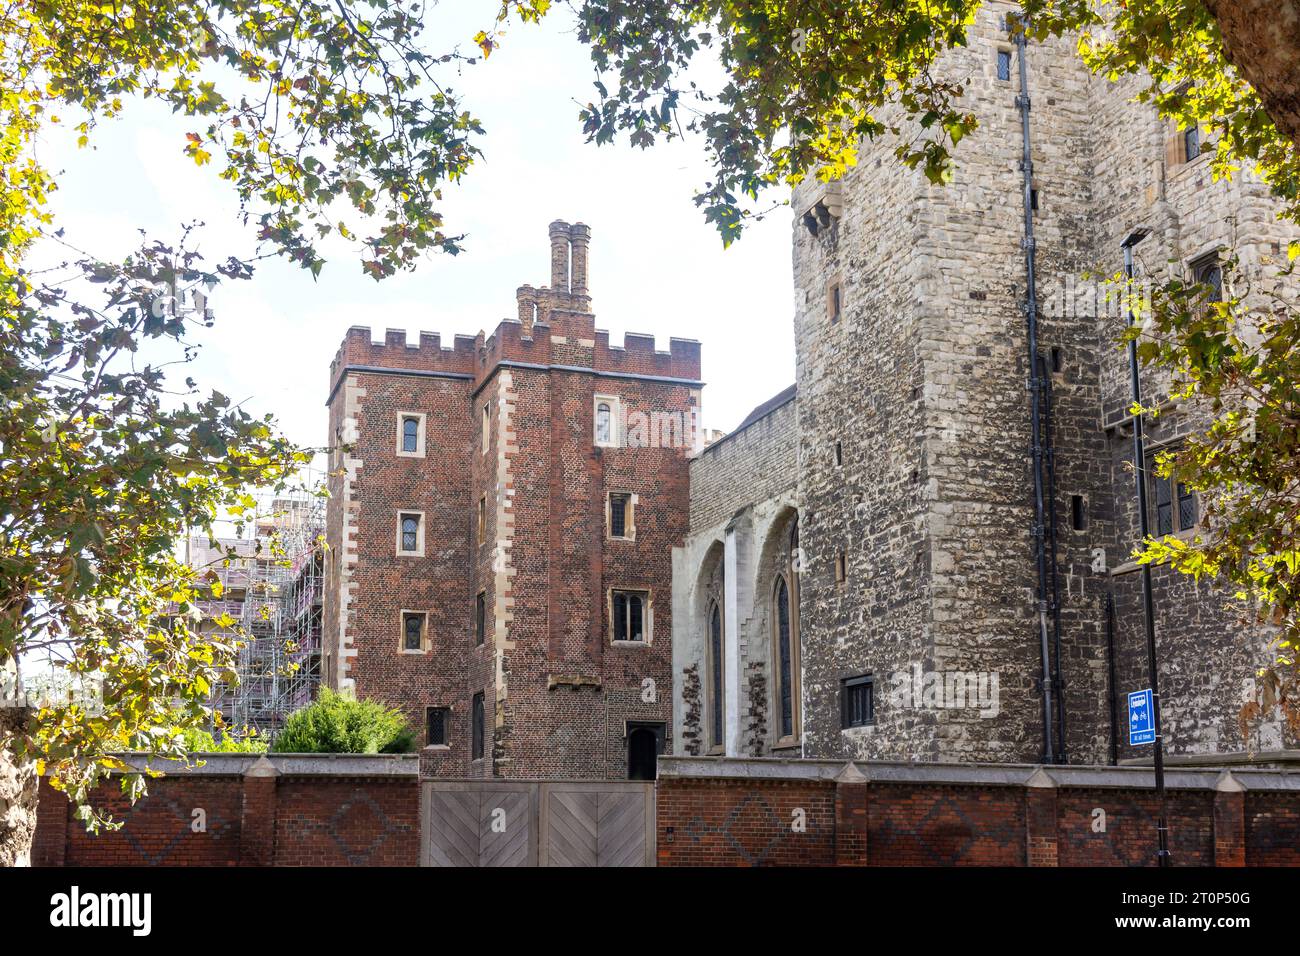 Lambeth Palace from Lambeth Palace Road, Borough of Lambeth, Greater London, England, Royaume-Uni Banque D'Images